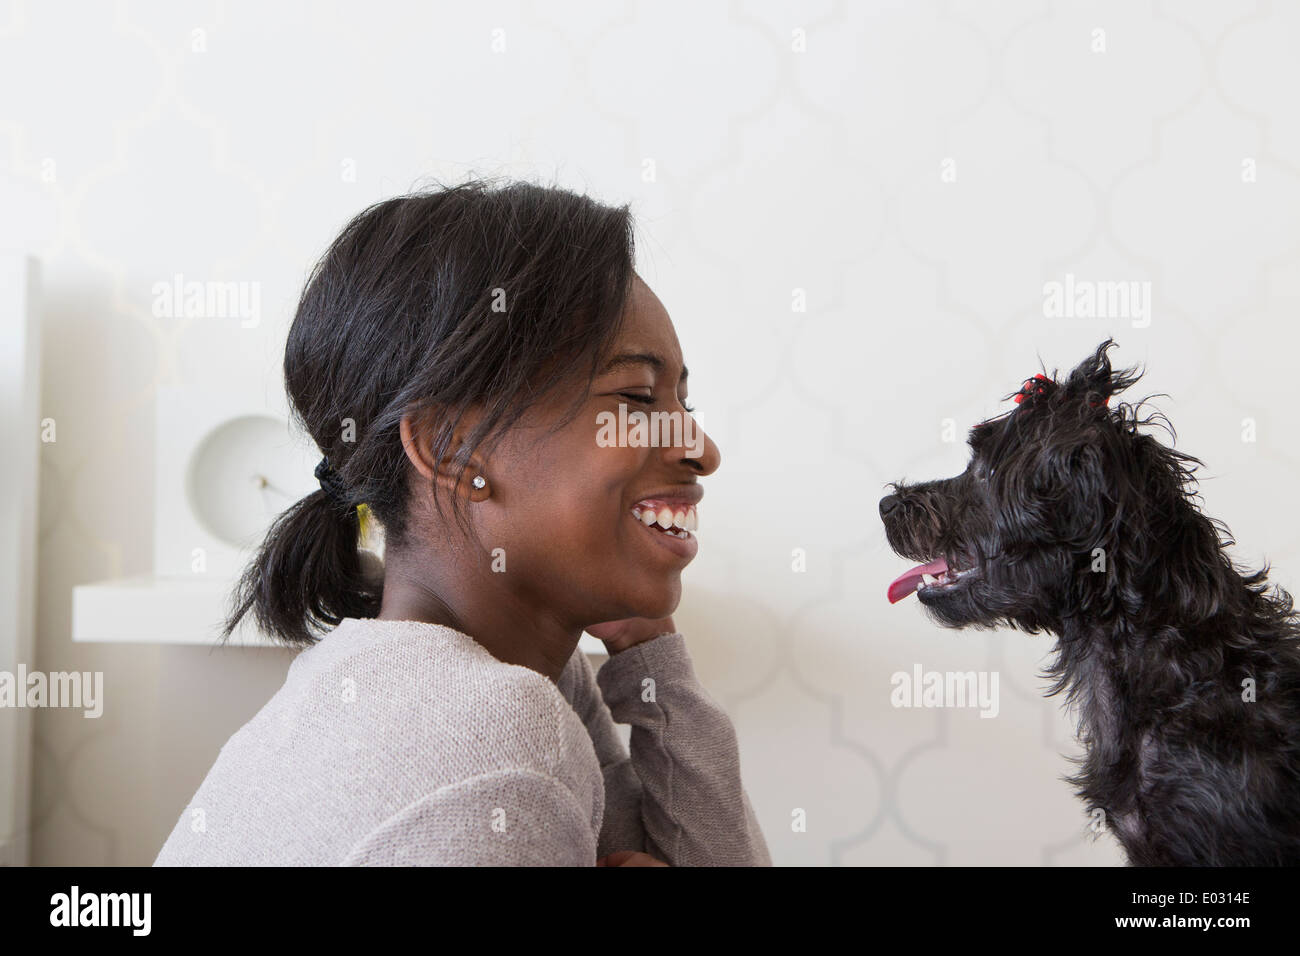 A young girl playing with her small black pet dog. Stock Photo